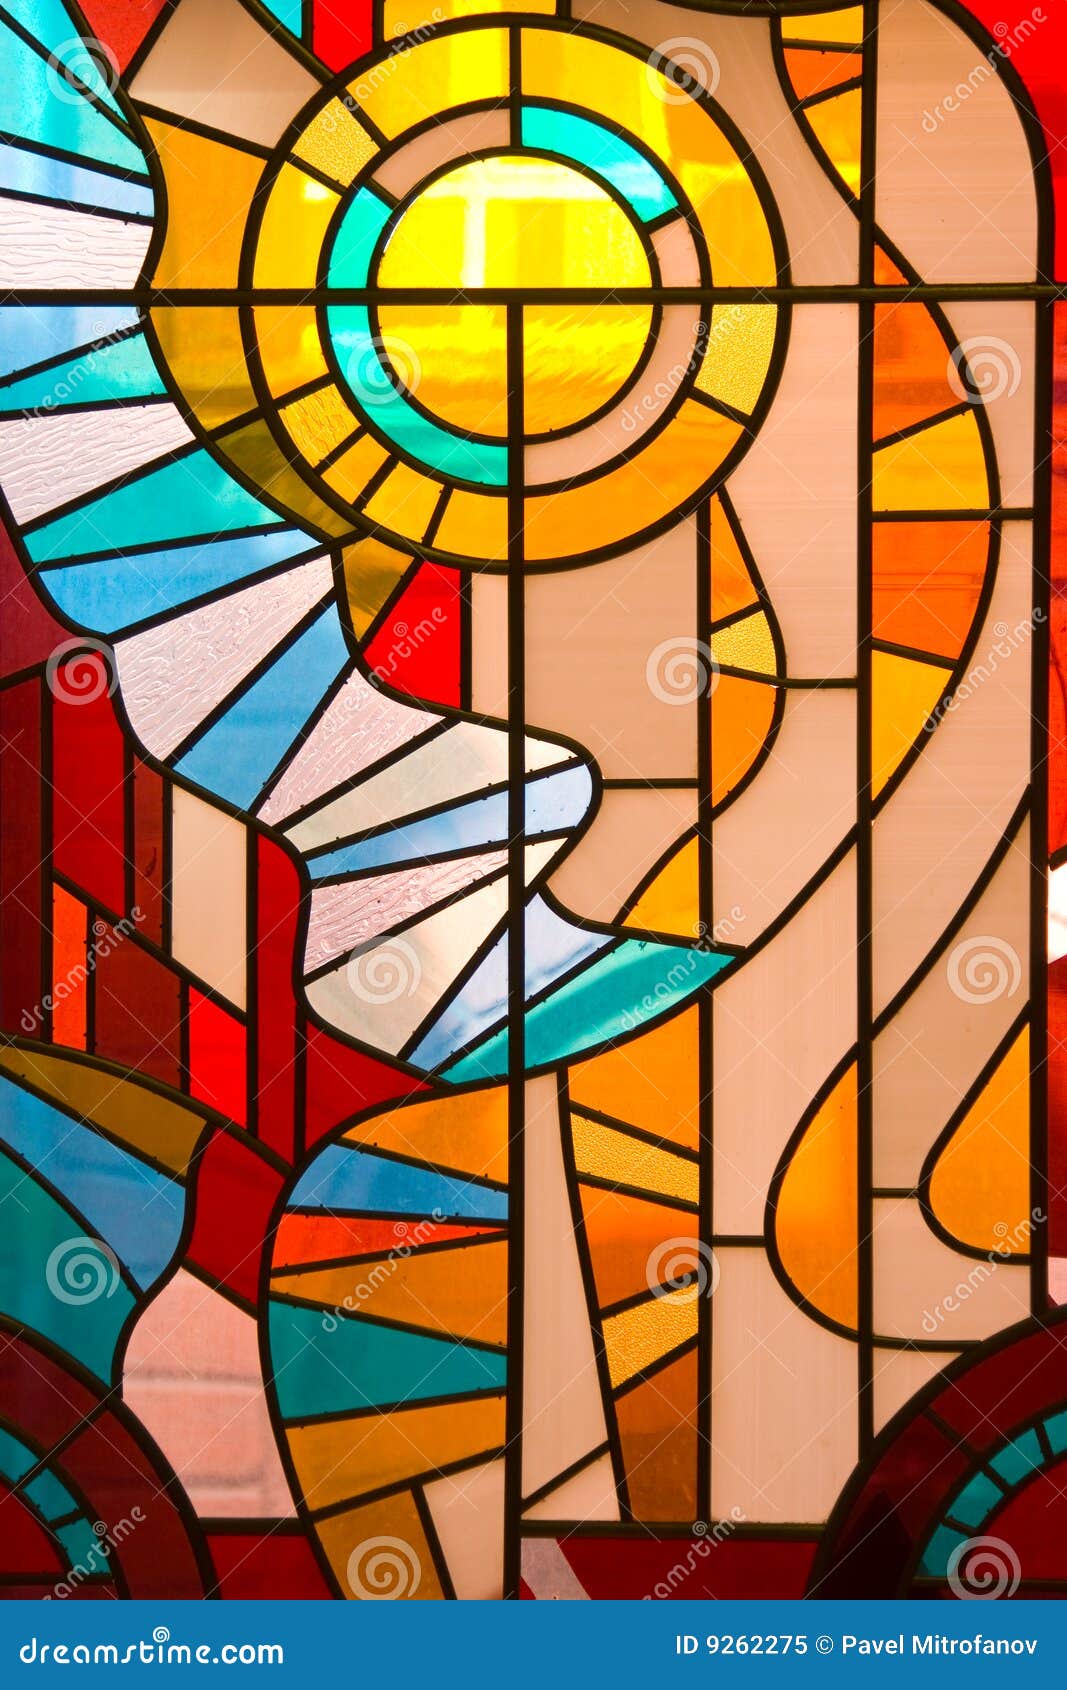 stained glass window clipart free - photo #9